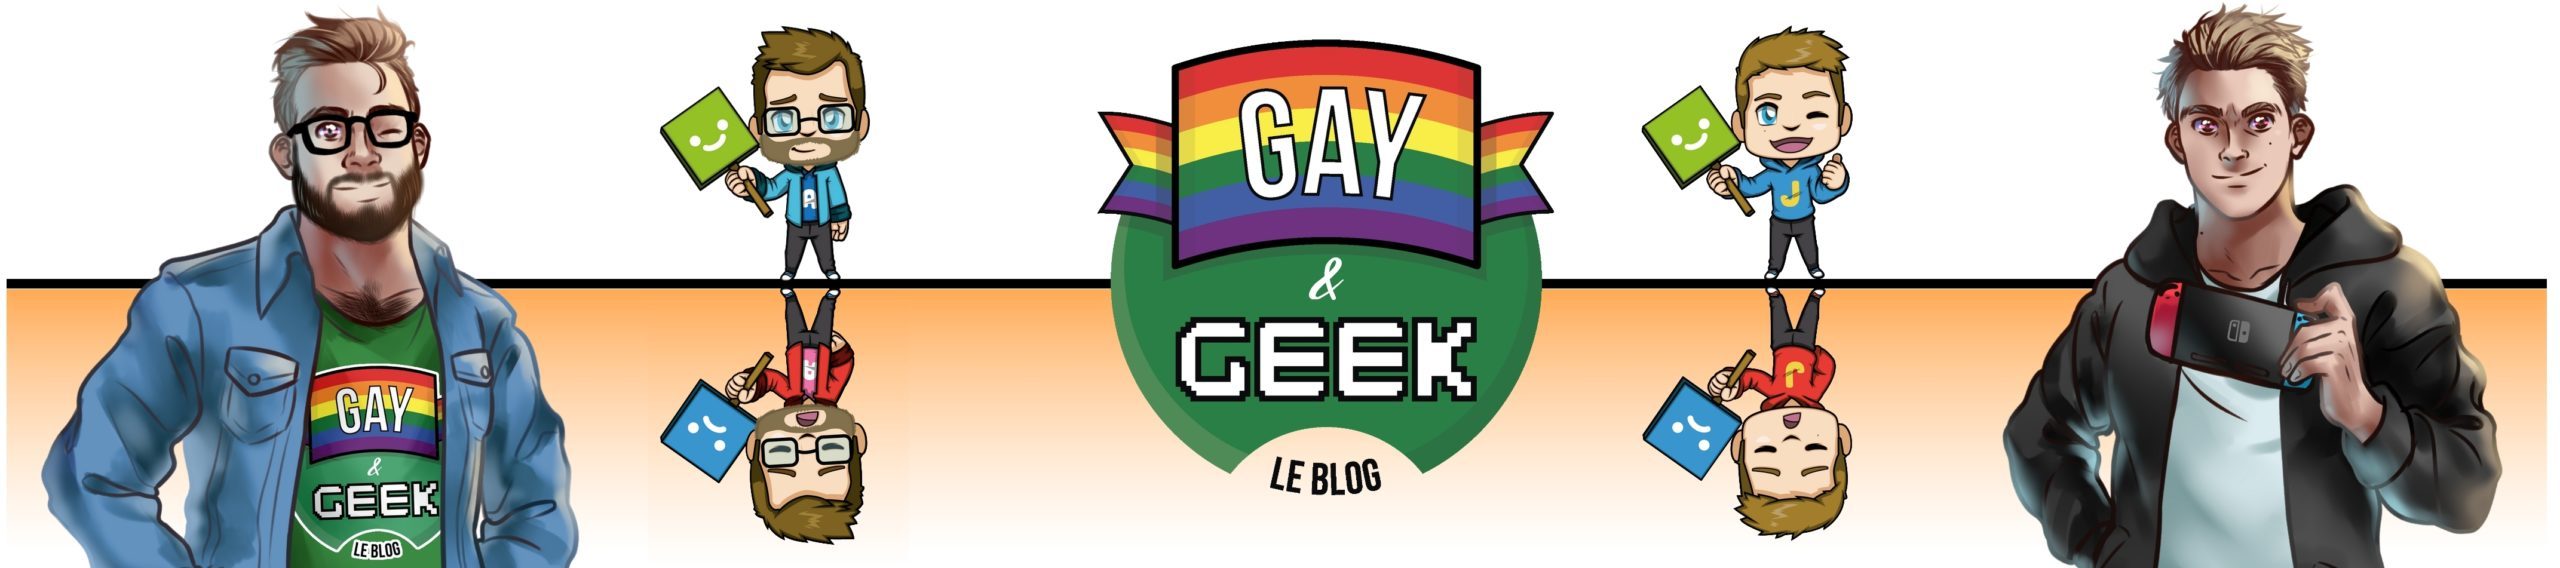 Gay and Geek